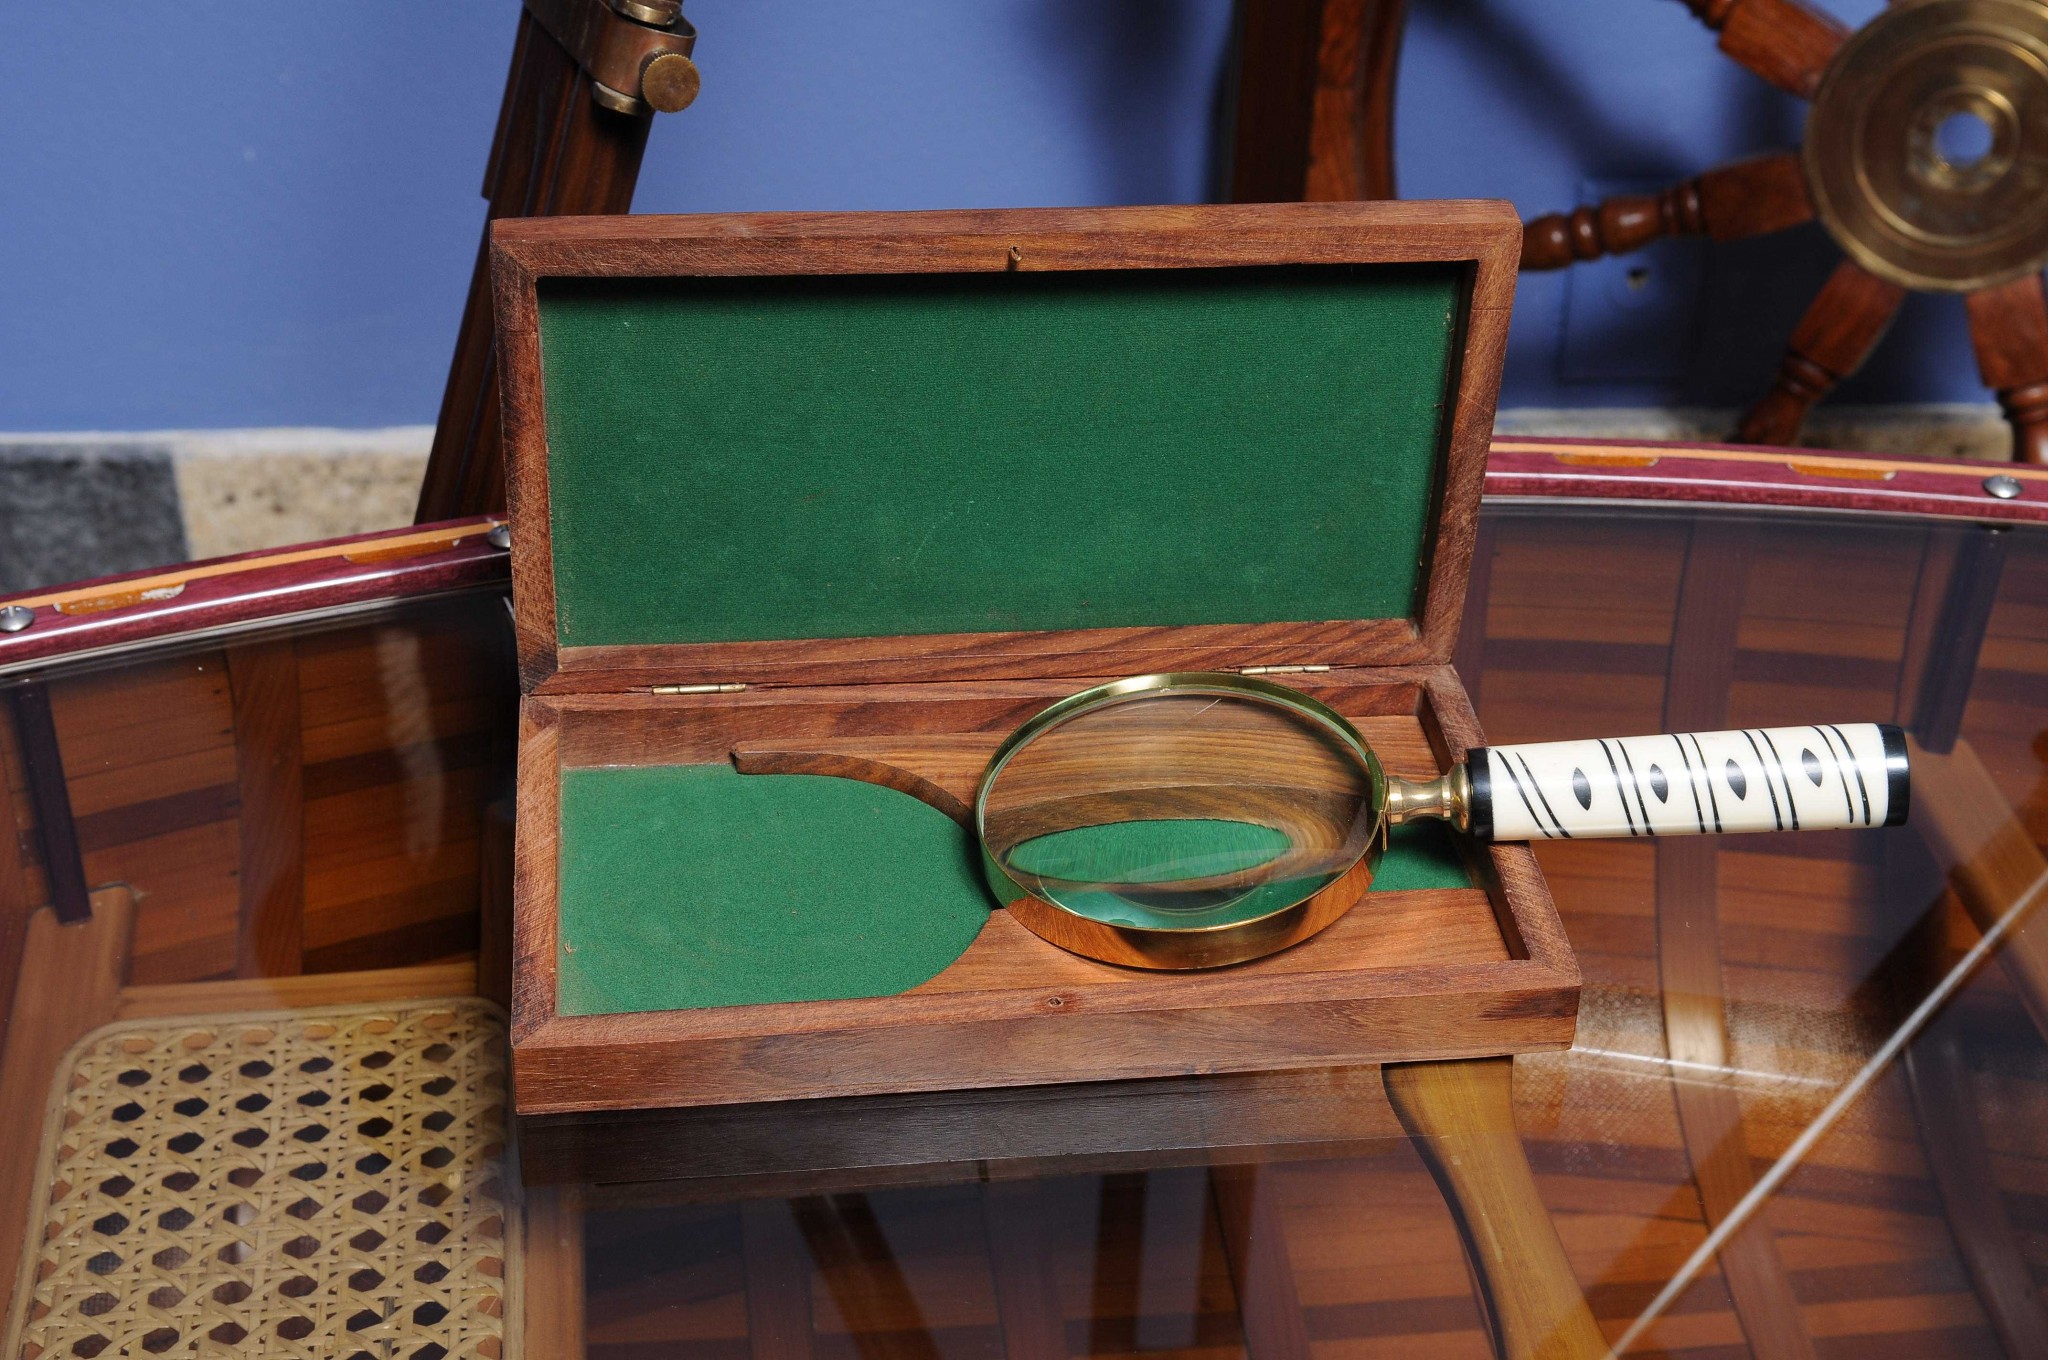 4" x 9" x 1" Magnifier in Wood Box